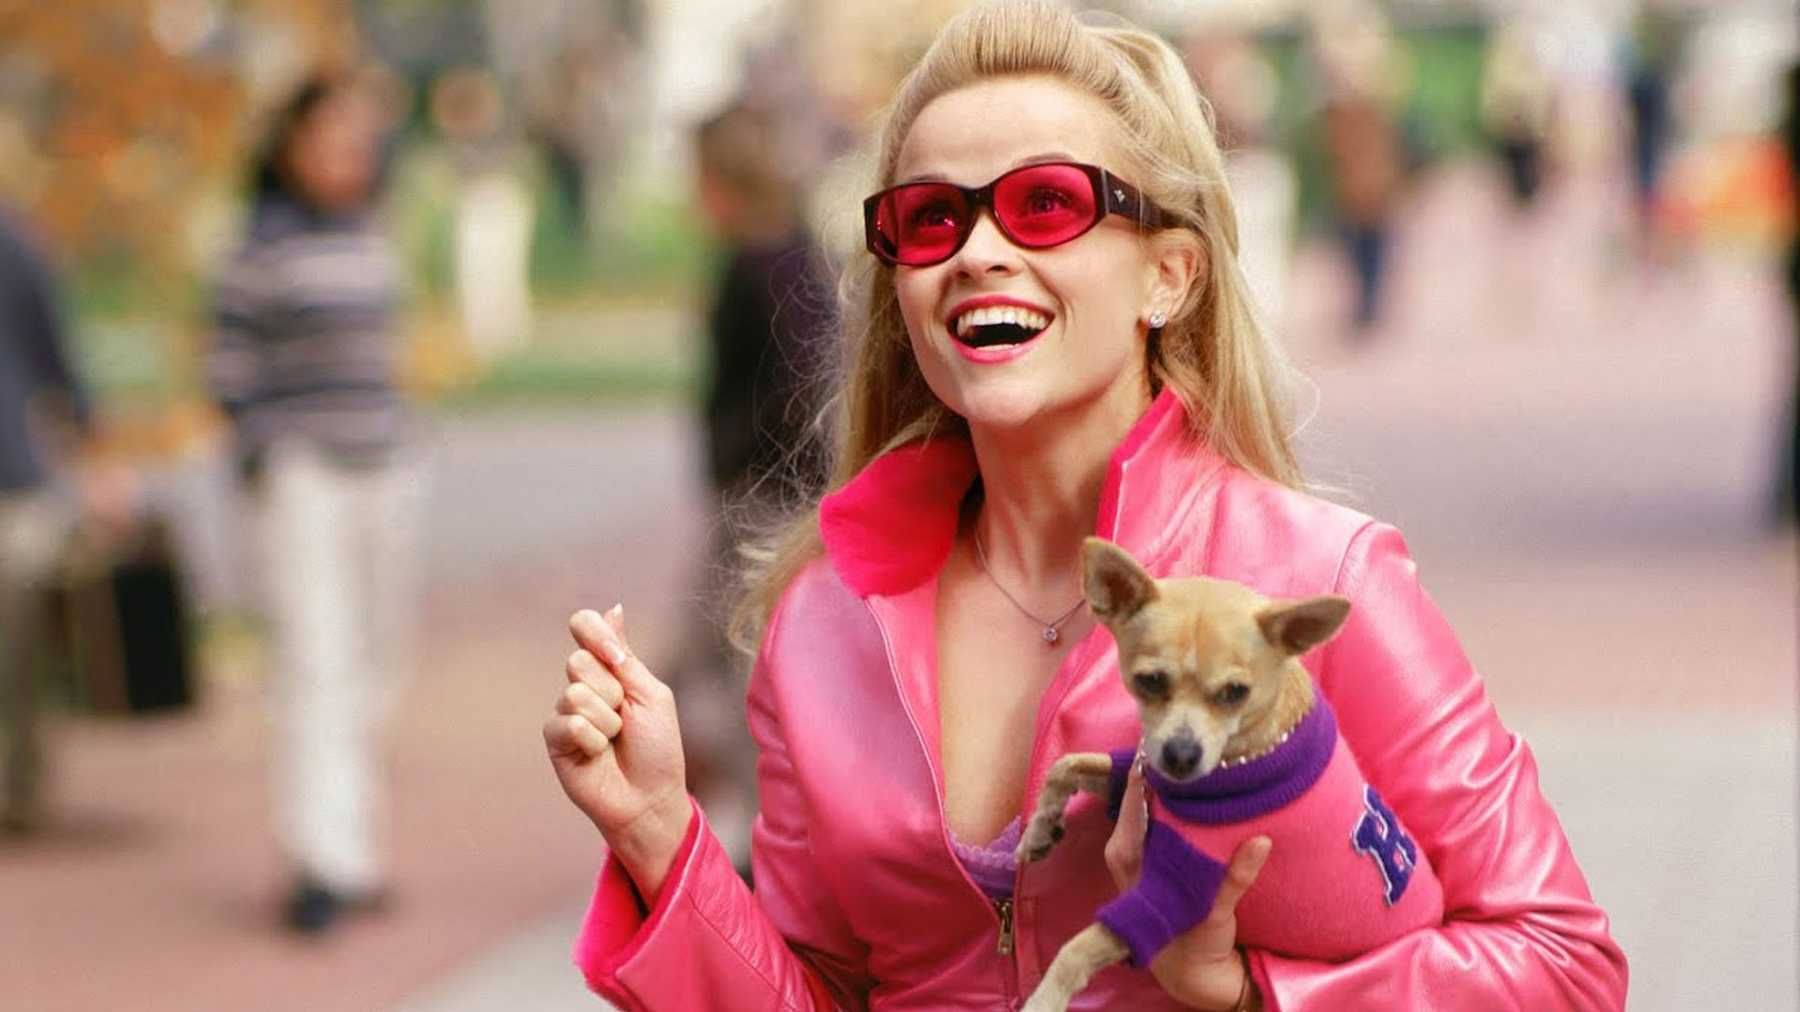 Legally Blonde 3 to Be Written by Mindy Kaling and Dan Goor | Collider